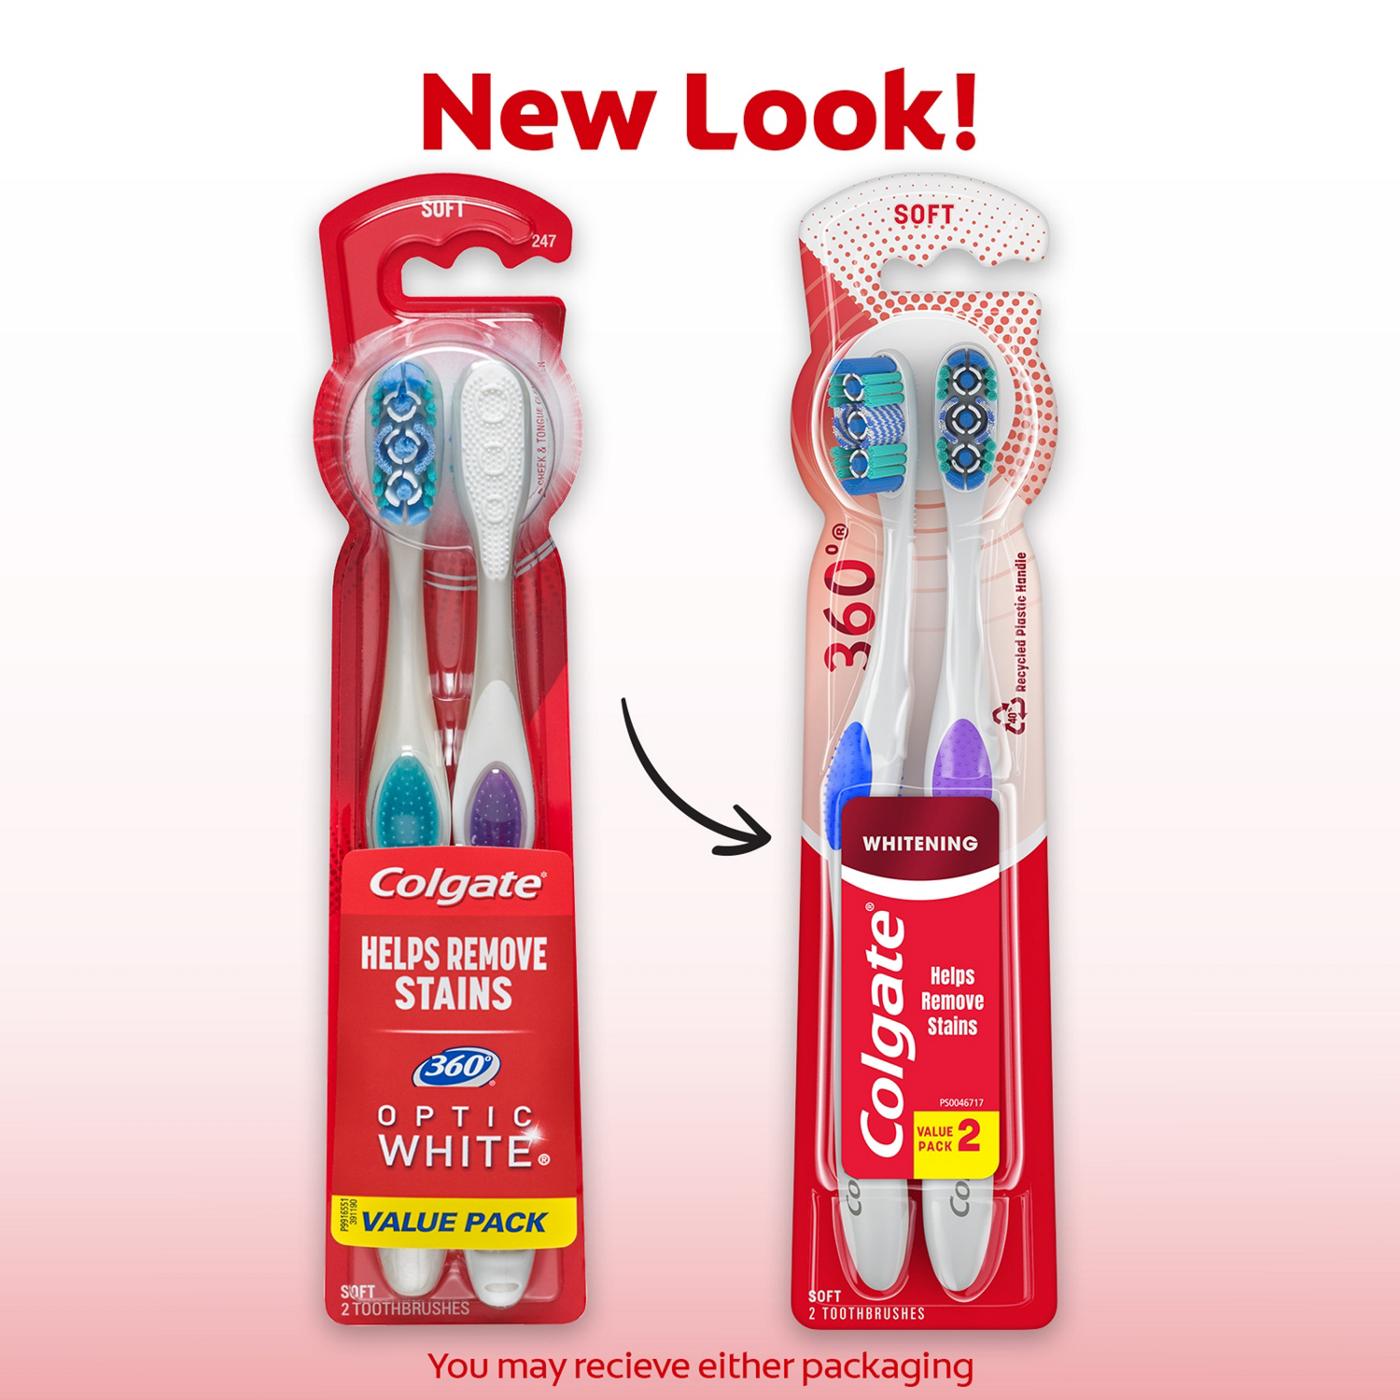 Colgate 360 Optic White Toothbrushes - Soft; image 10 of 11